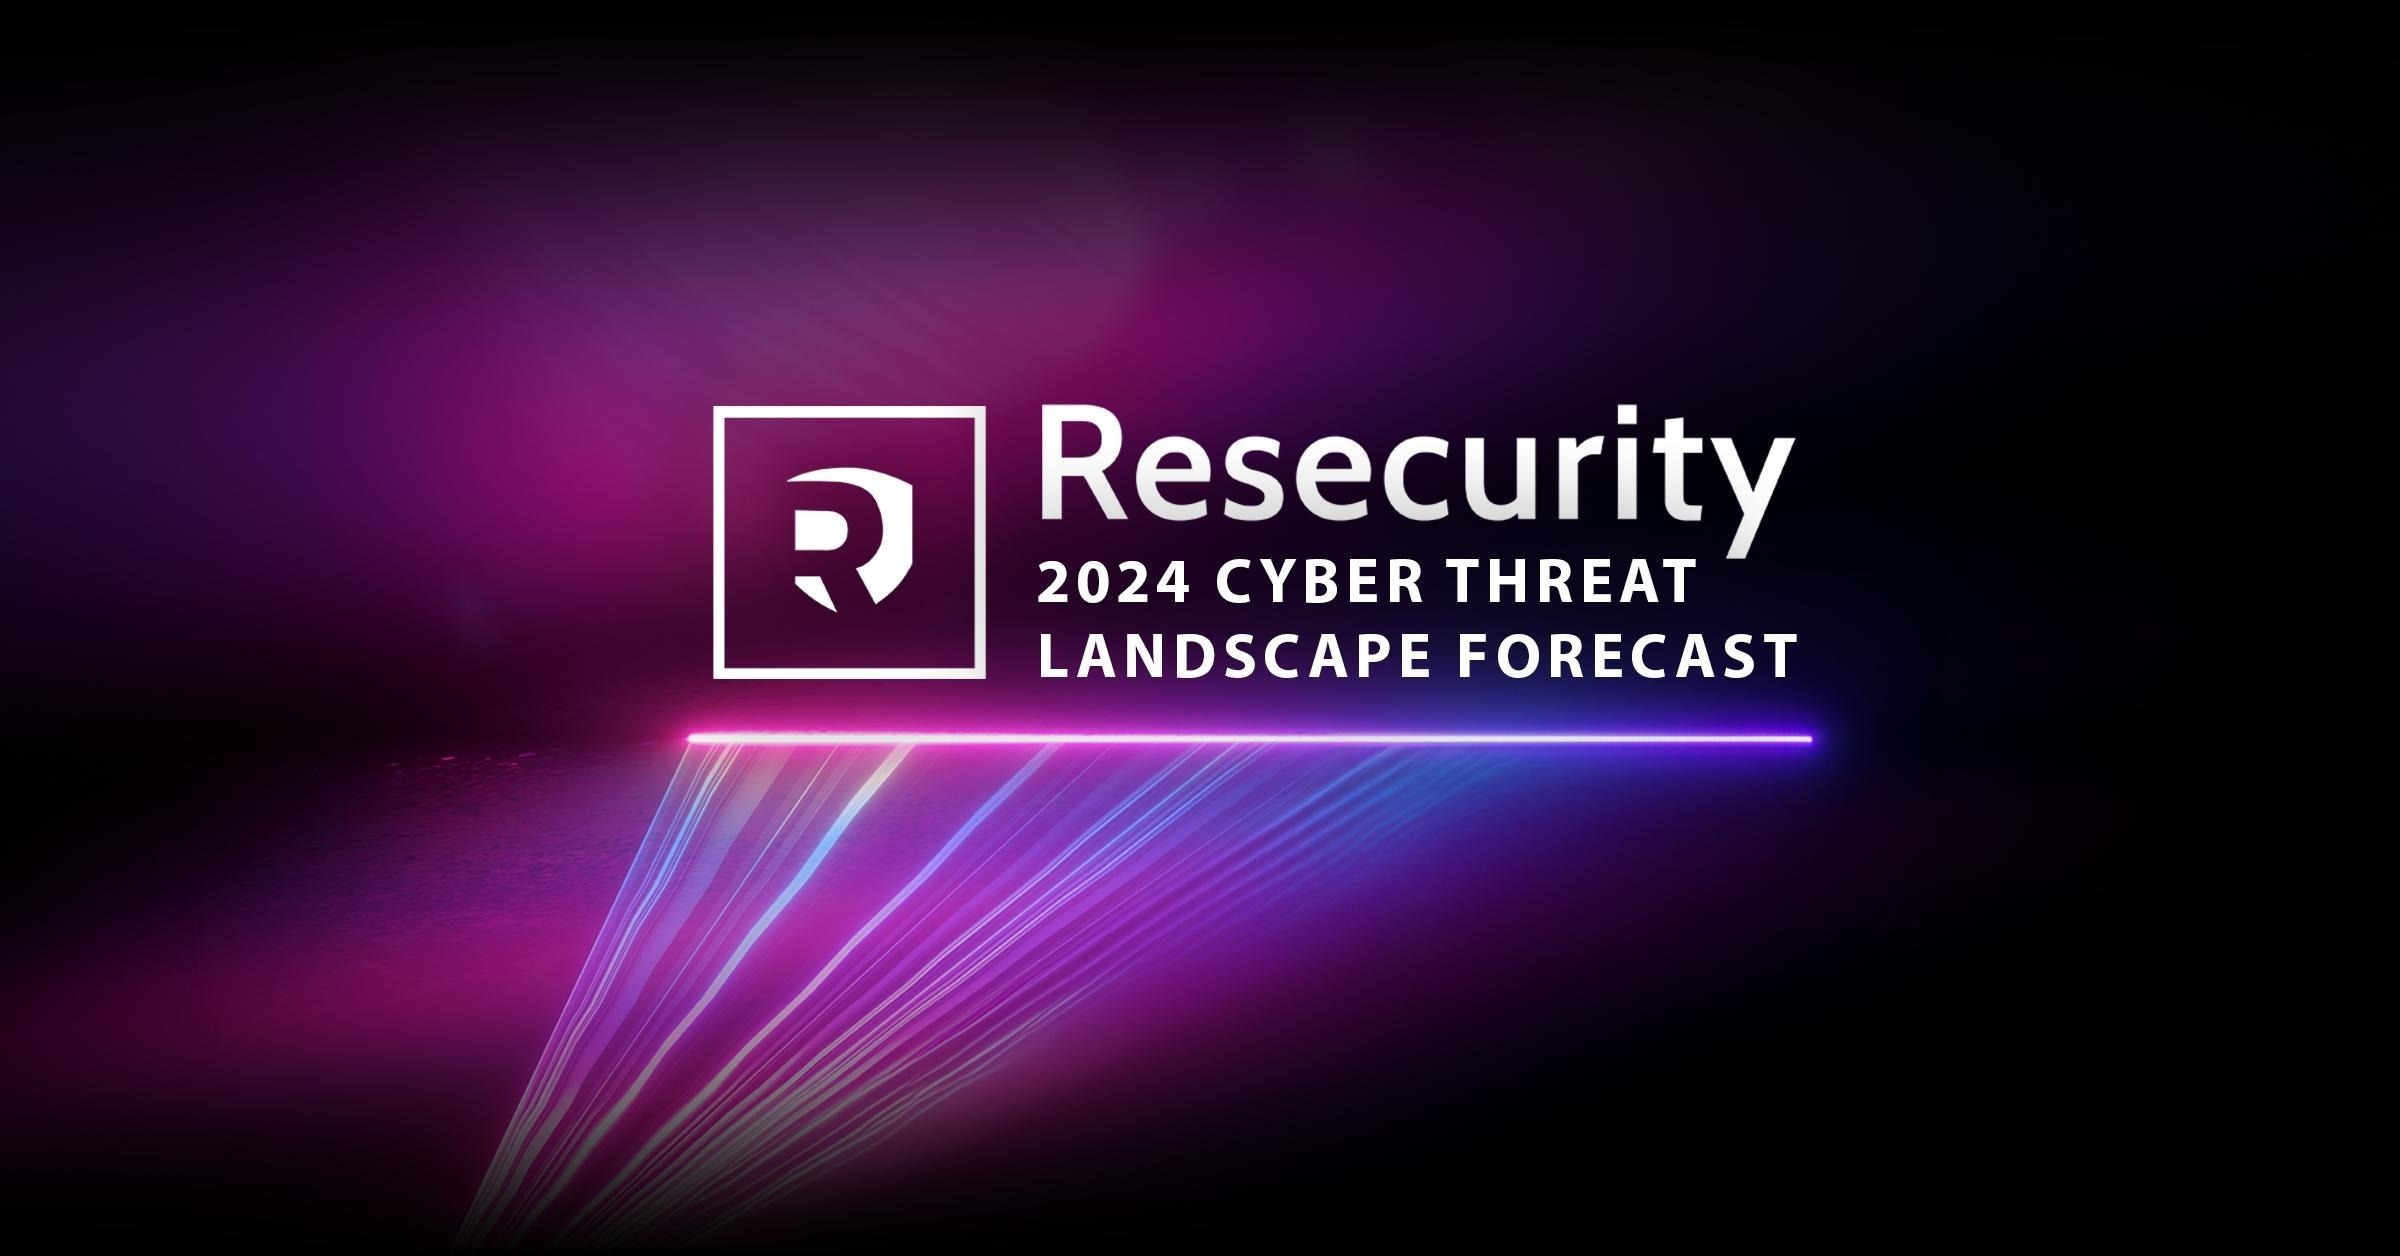 Resecurity Released a 2024 Cyber Threat Landscape Forecast